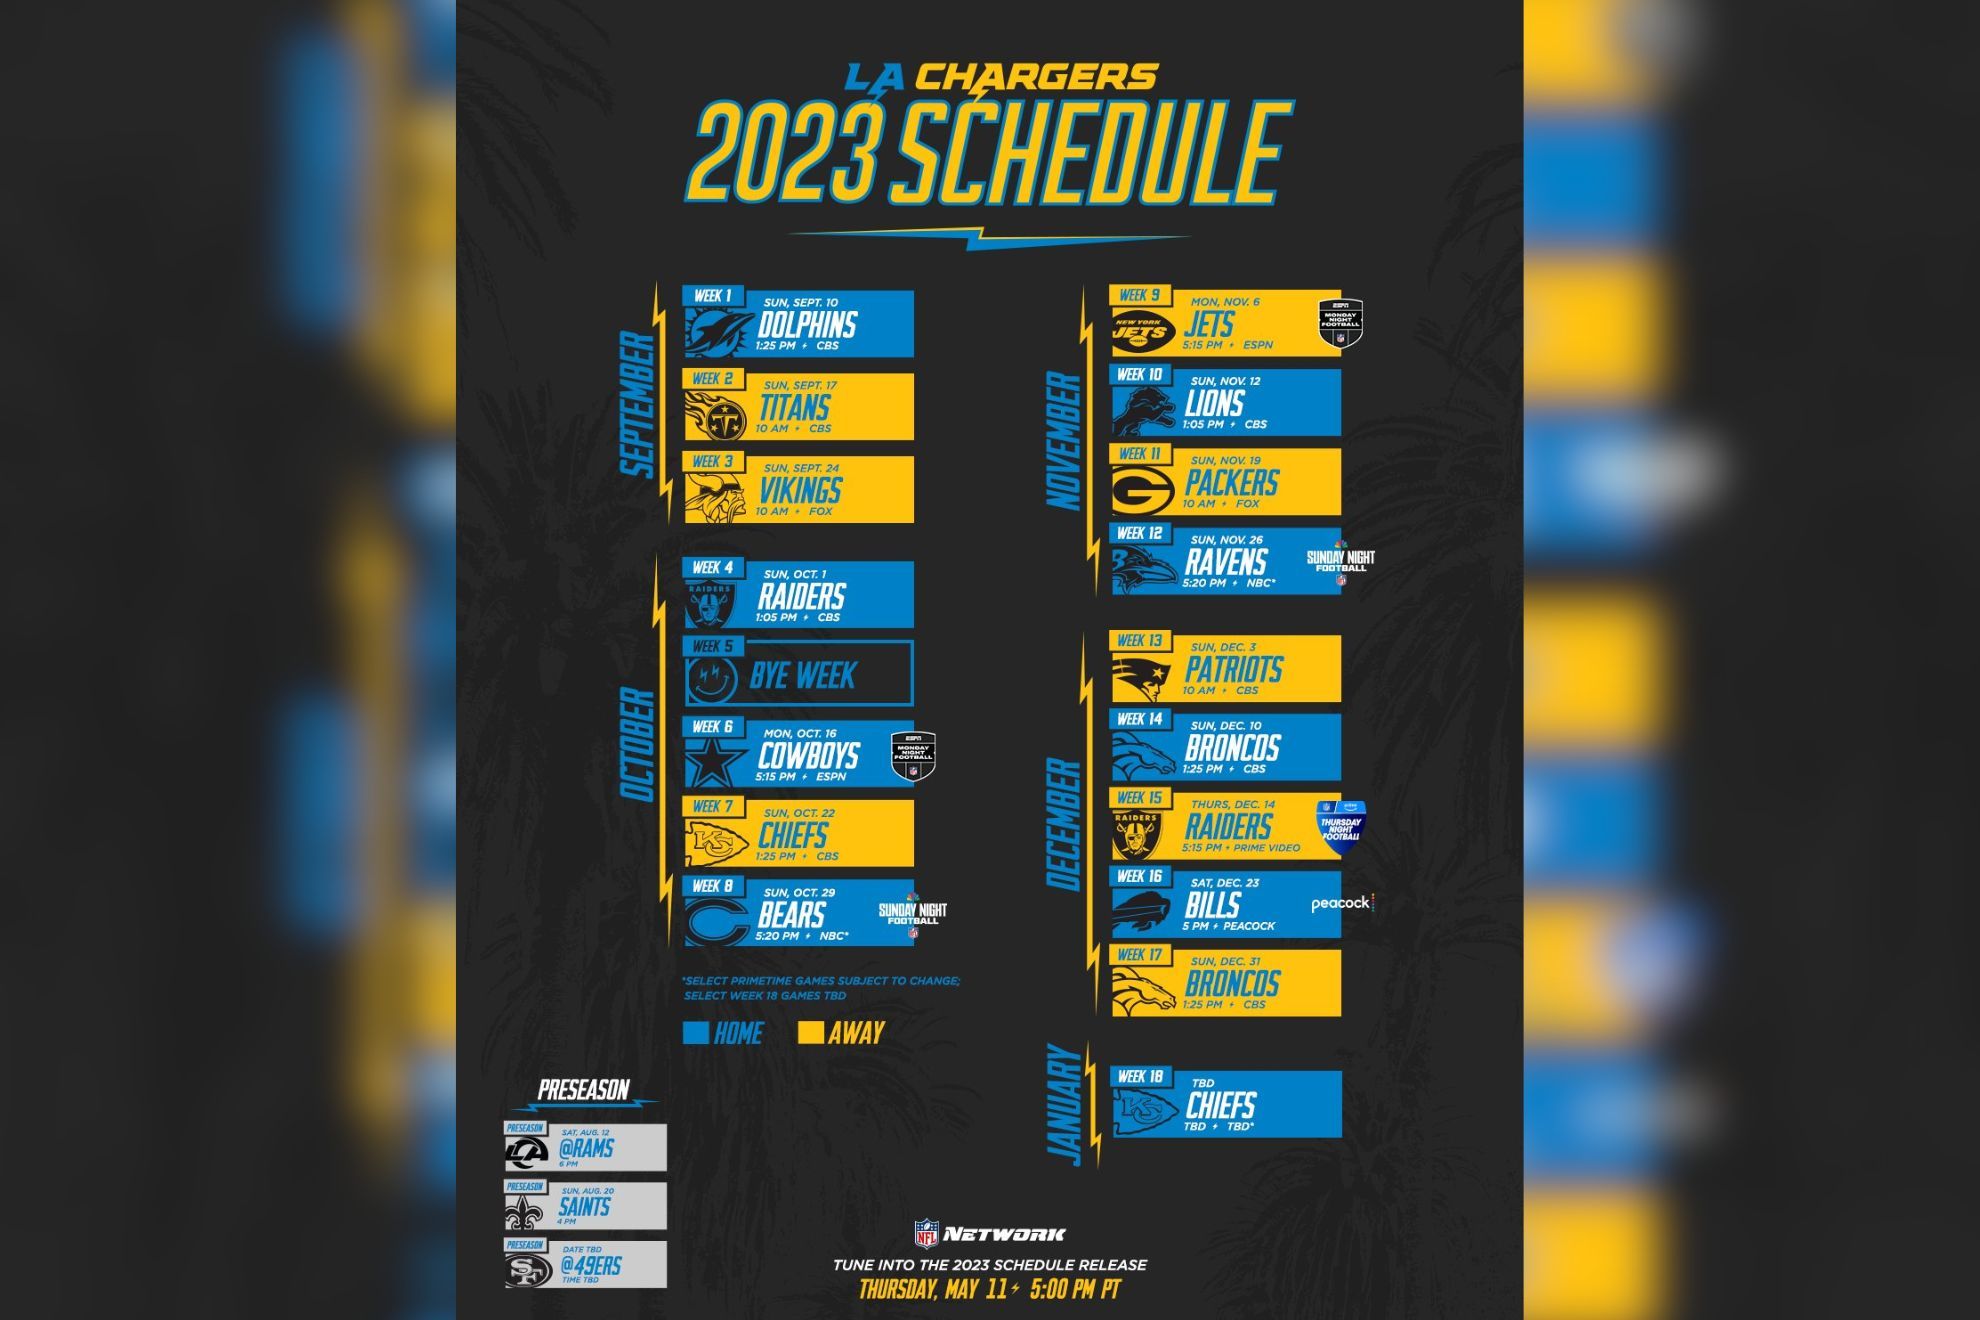 Los angeles chargers schedule for 2023 nfl season | MARCA English